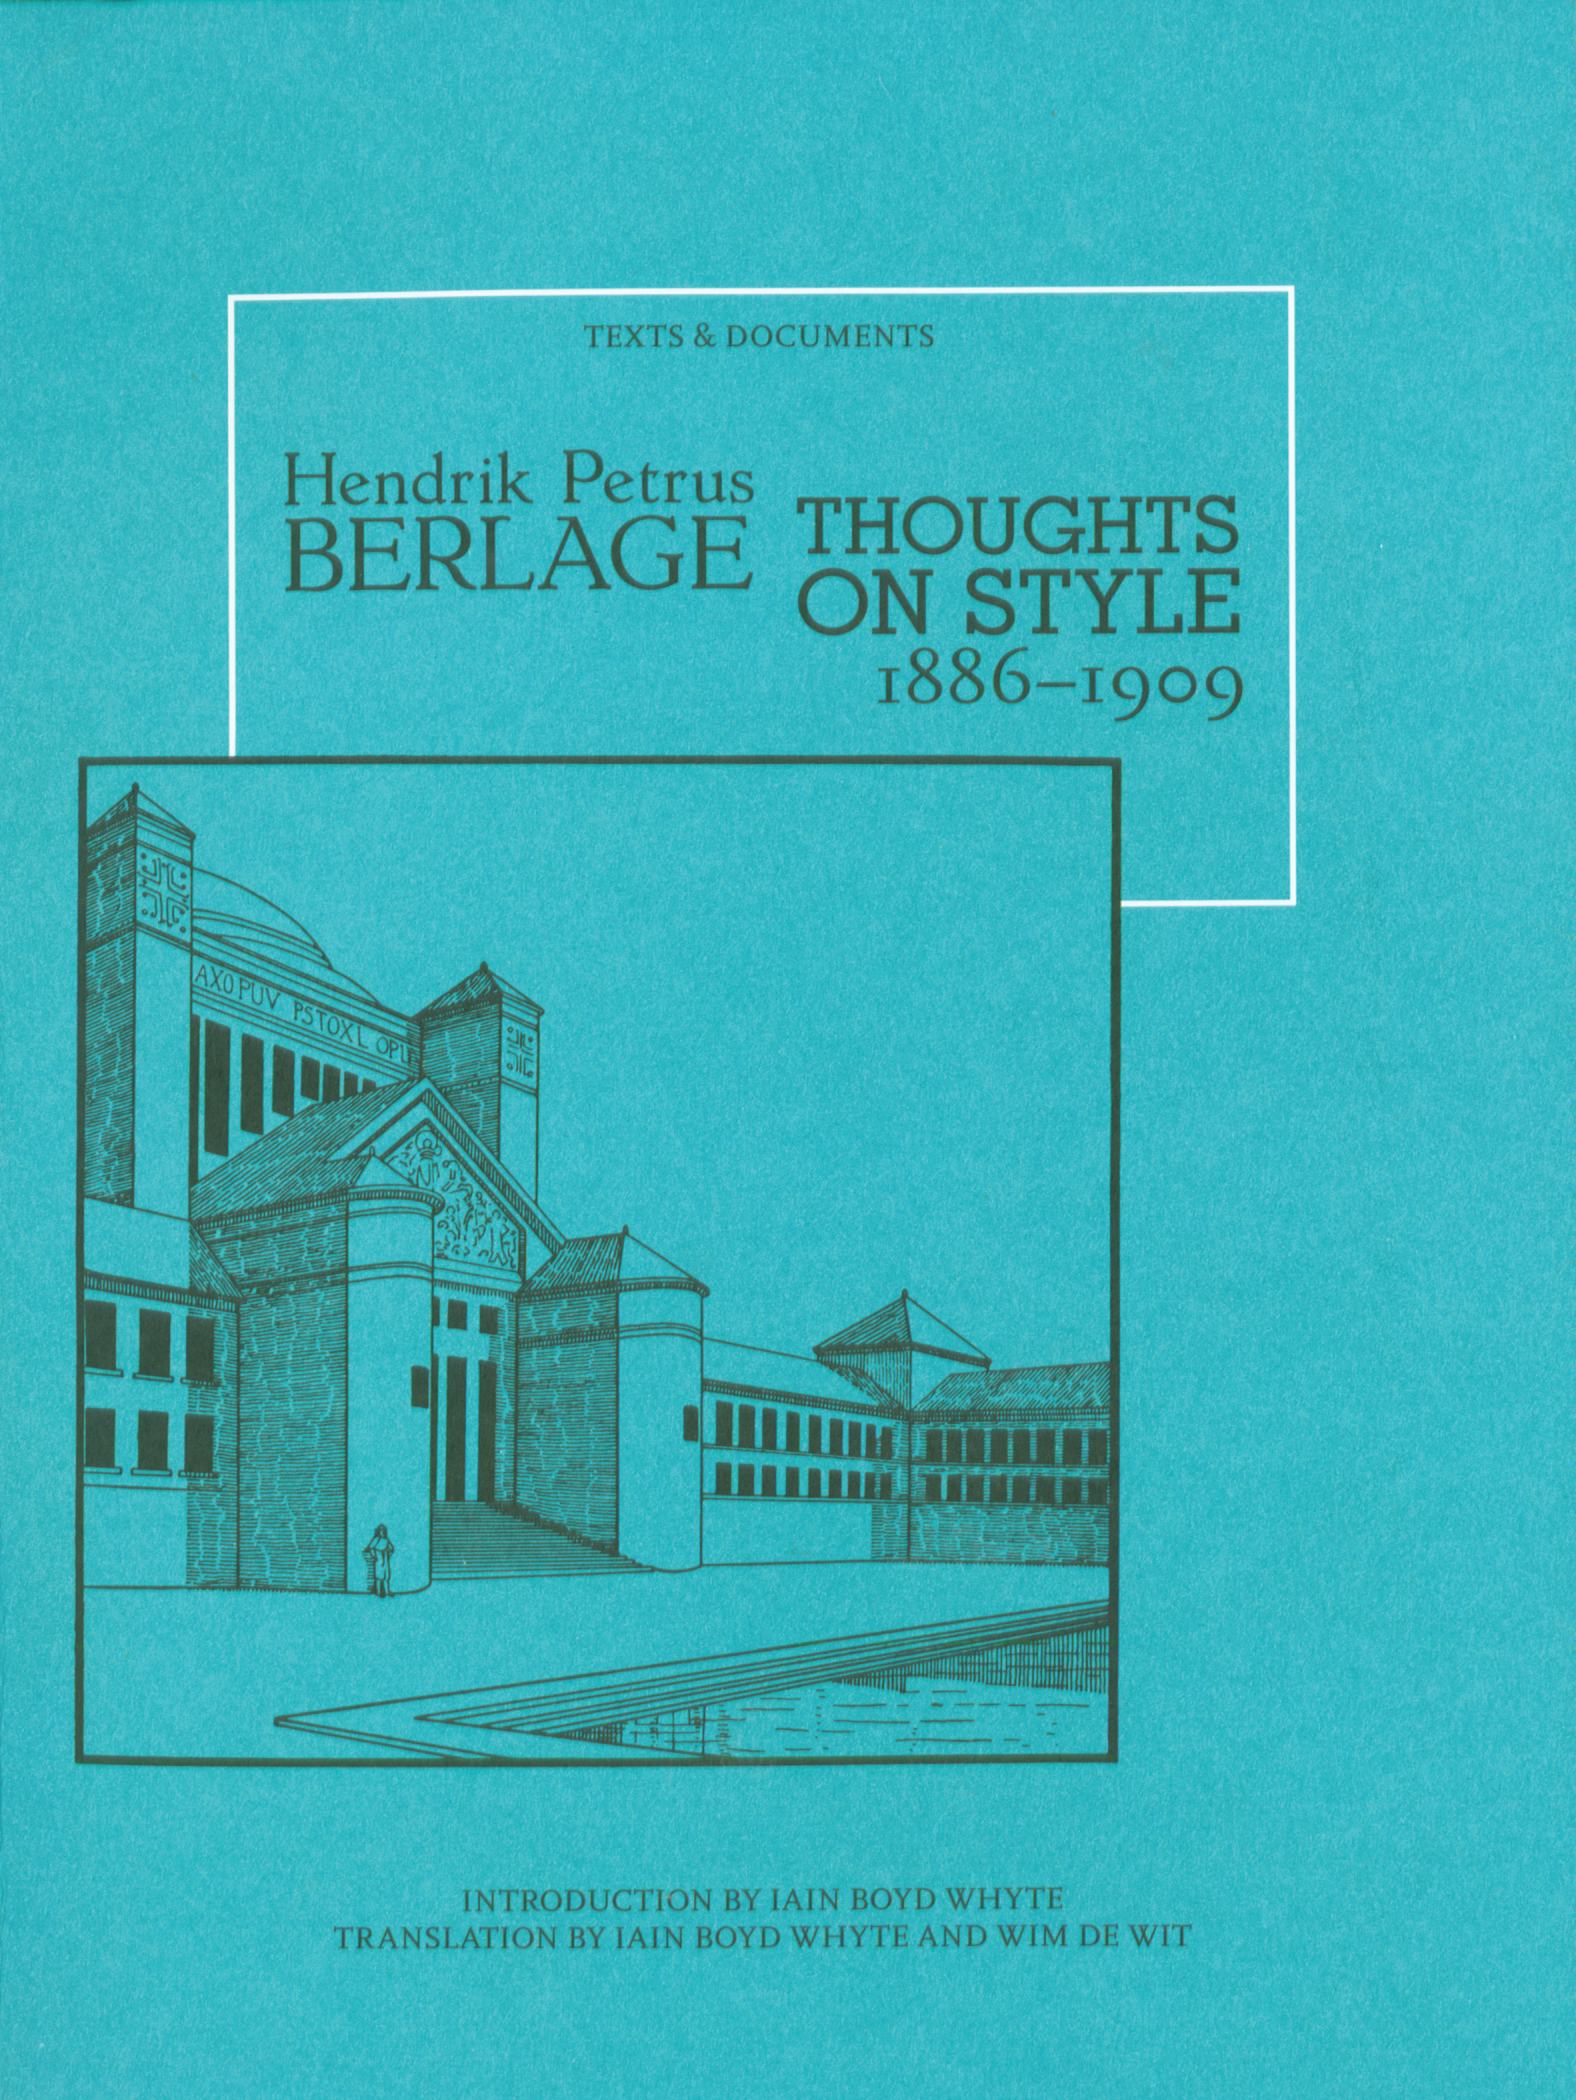 Hendrik Petrus Berlage : Thoughts on Style, 1886—1909 / Introduction by Iain Boyd Whyte ; Translation by Iain Boyd Whyte and Wim de Wit. — Santa Monica : The Getty Center, 1996